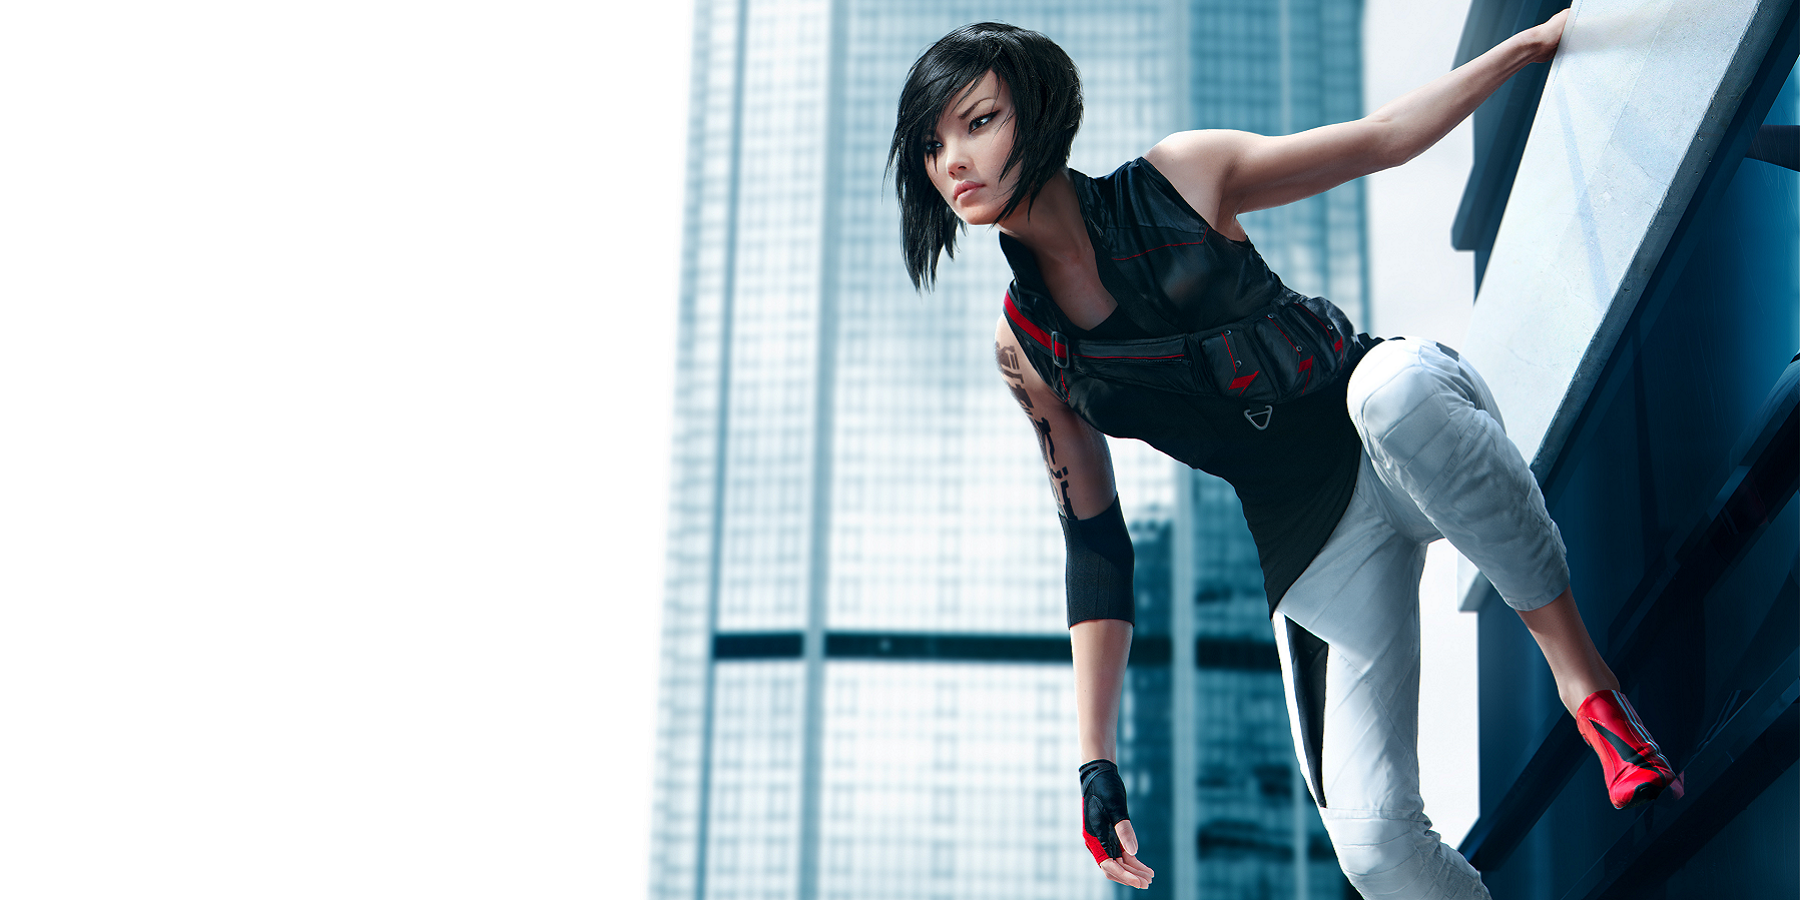 Image from Mirror's Edge showing protagonist Faith hanging off the side of a building.